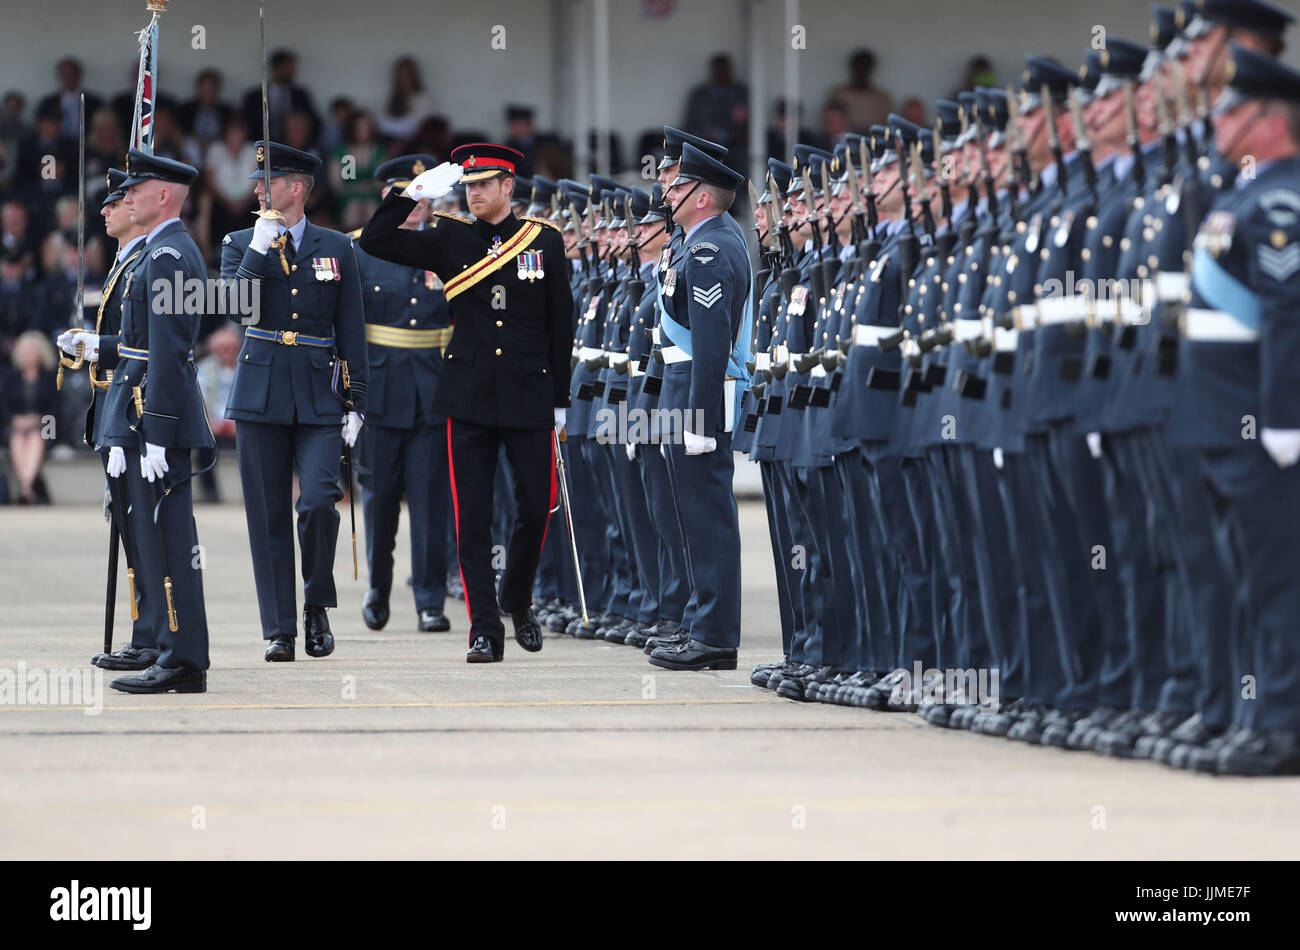 Prince Harry inspects the honour guard as he arrives at RAF Honington in Suffolk where will present a new Colour to the ground fighting force of the RAF in its 75th anniversary year. Stock Photo